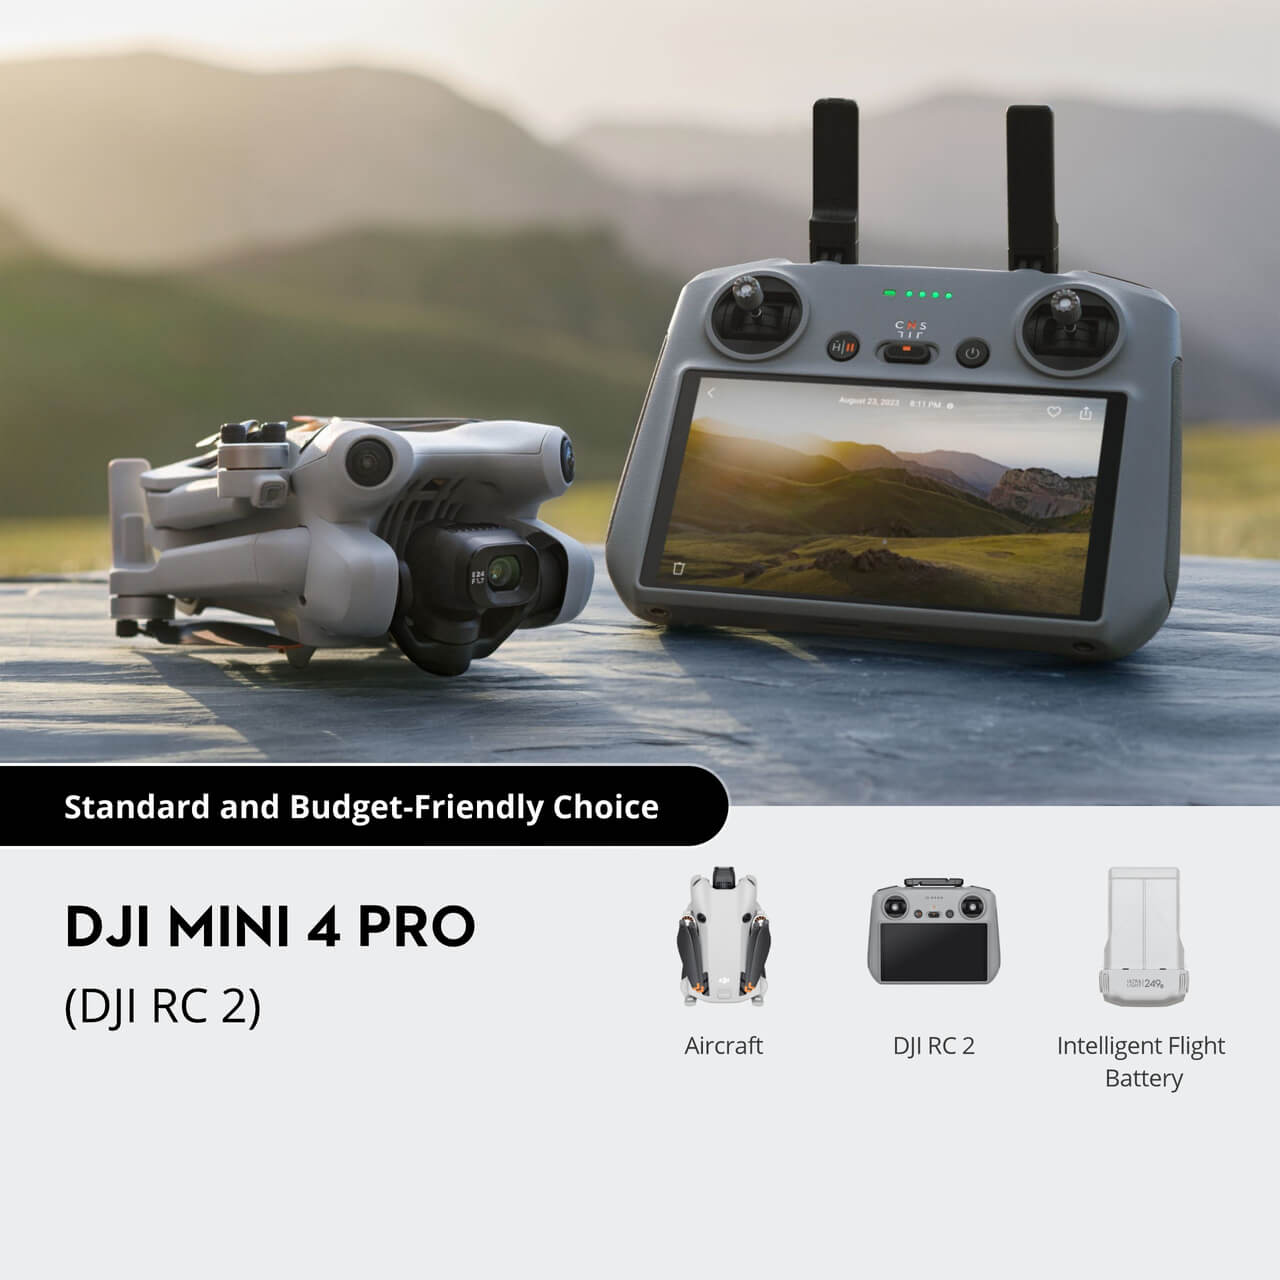 DJI Mini 4 Pro Fly More Combo Plus with DJI RC 2, Mini Drone with 4K HDR  Video, 3 Intelligent Flight Battery Plus for up to 135 Mins Flight Time